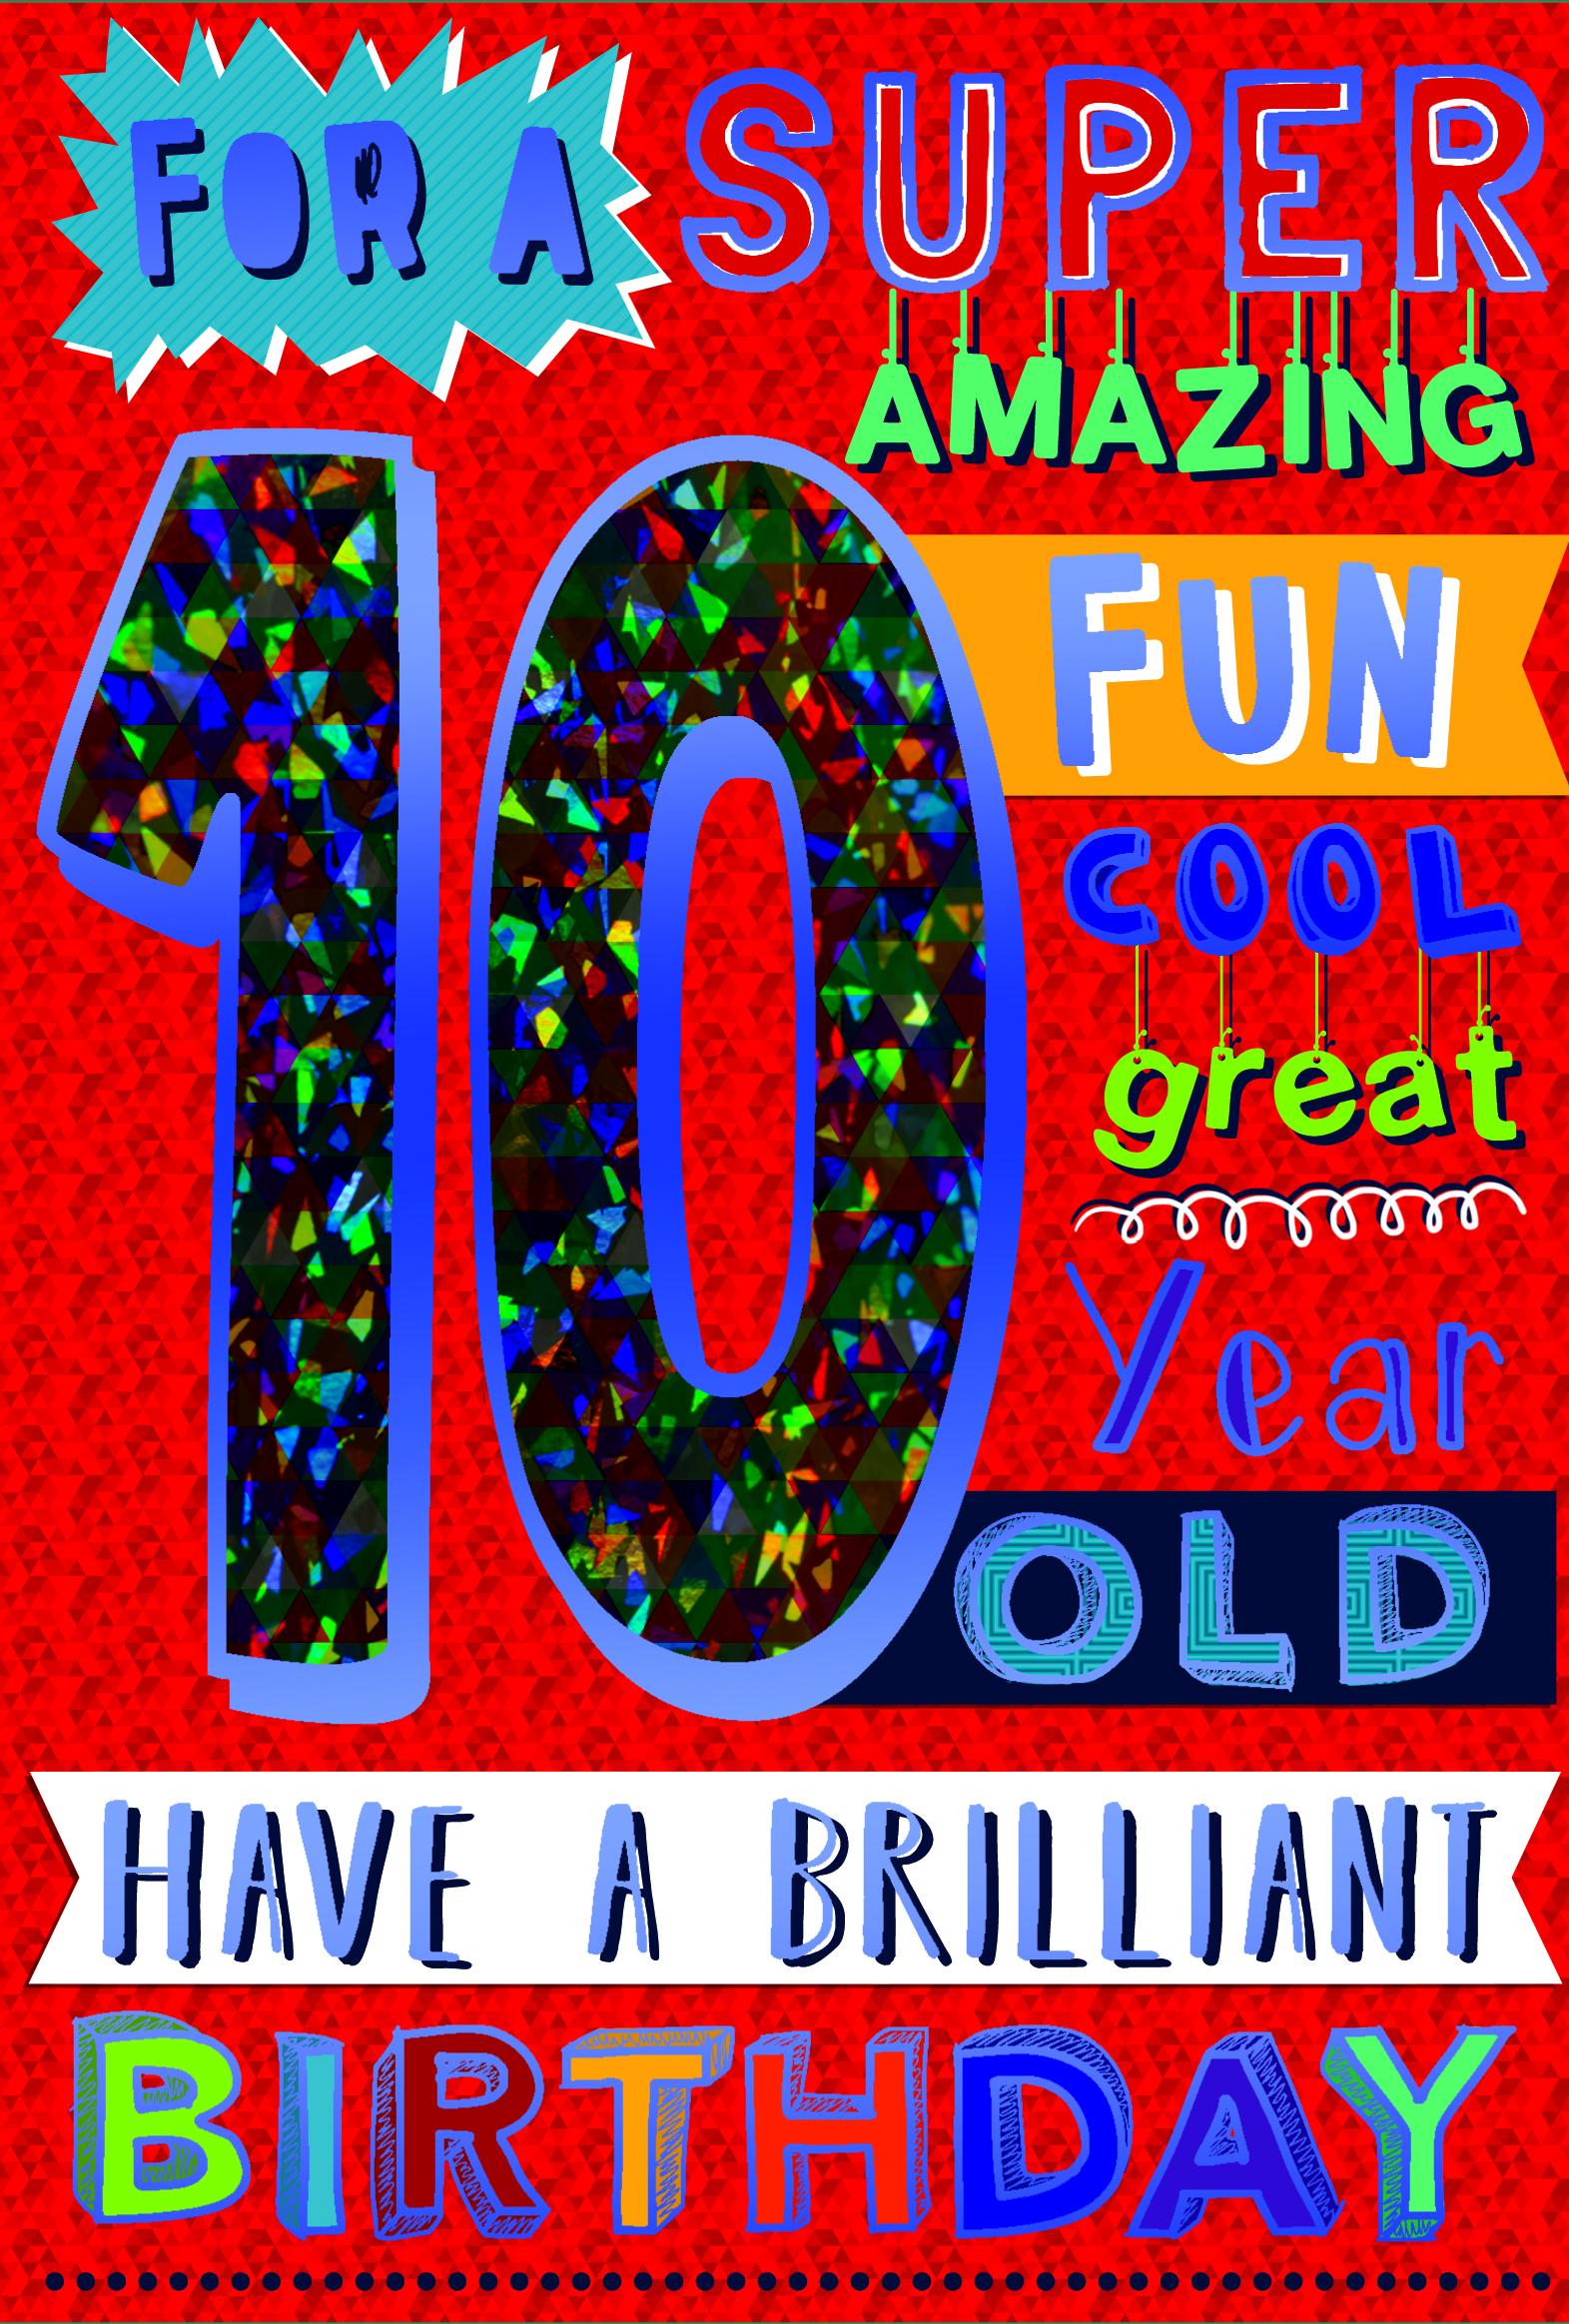 Age 10 Cards (Sold in 6s)